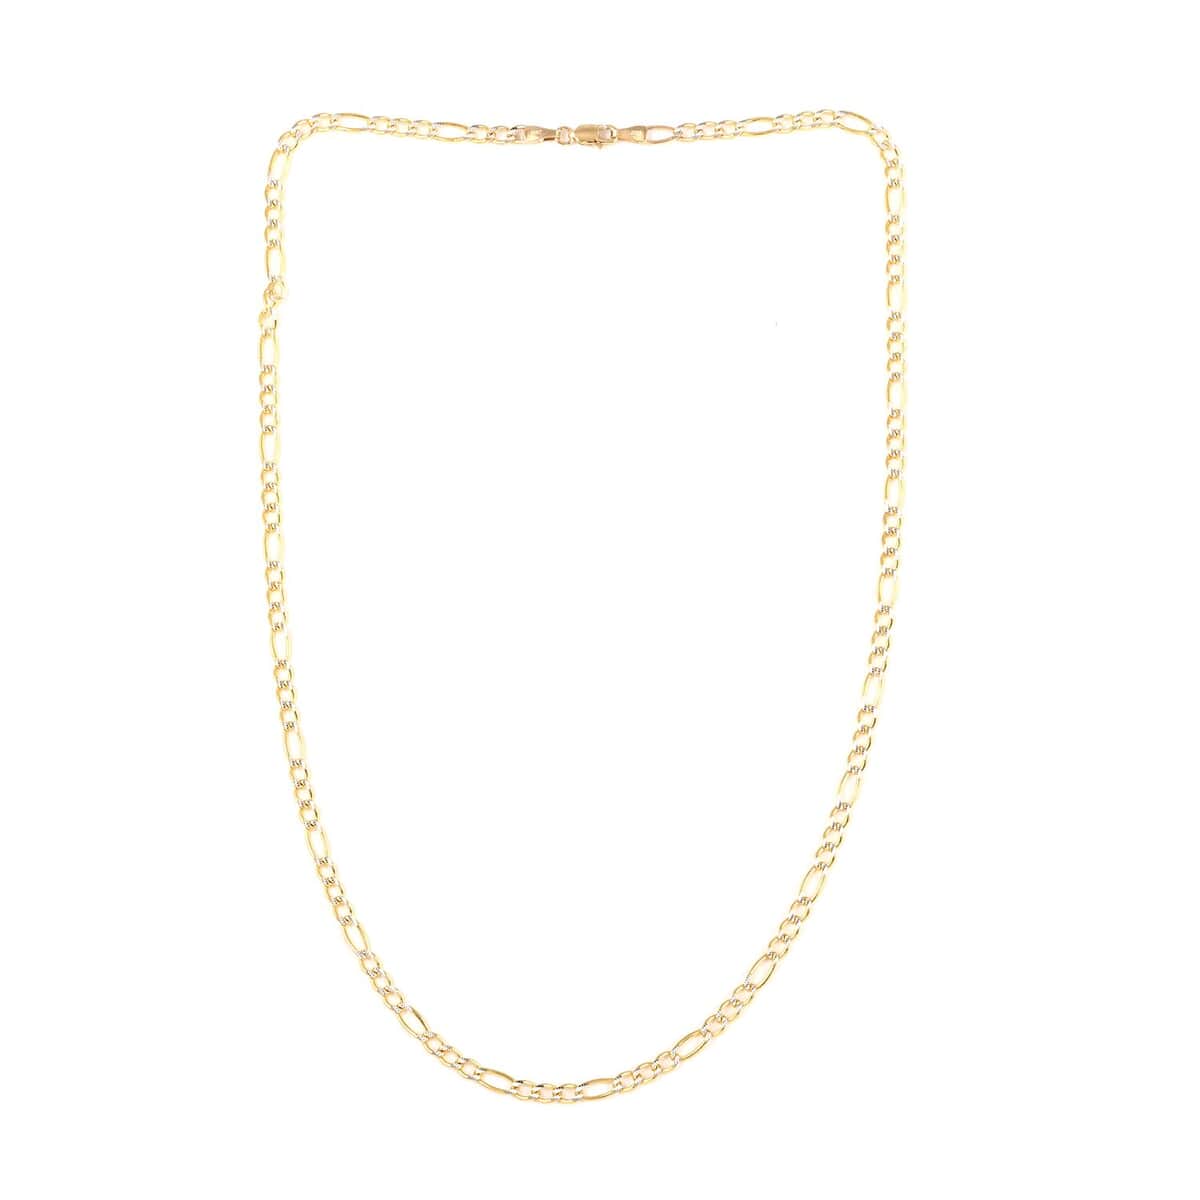 Maestro Gold Collection Italian 10K Yellow & White Gold Pave Figaro Necklace | Dual Tone Gold Figaro Chain Necklace | 18 Inches Chain Necklace | Gold Jewelry For Her 6.80 Grams image number 5